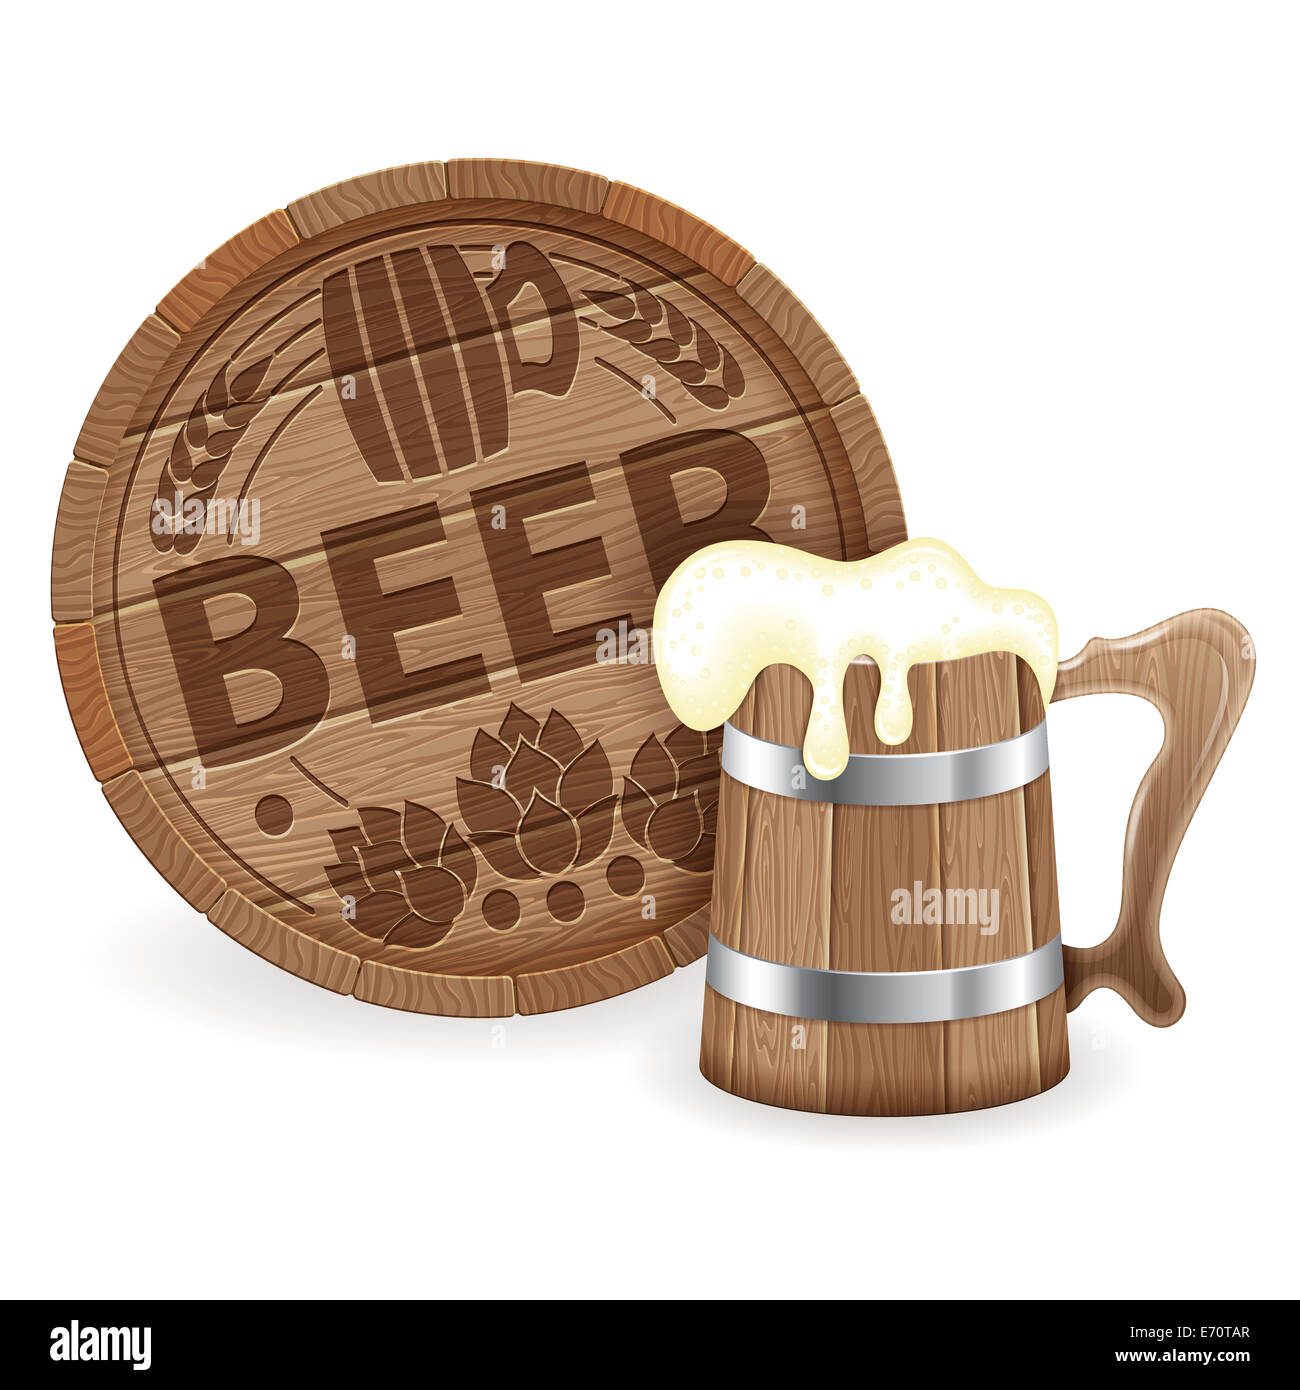 Oktoberfest Poster with Barrel of Beer and Wooden Mug, isolated on white background Stock Photo